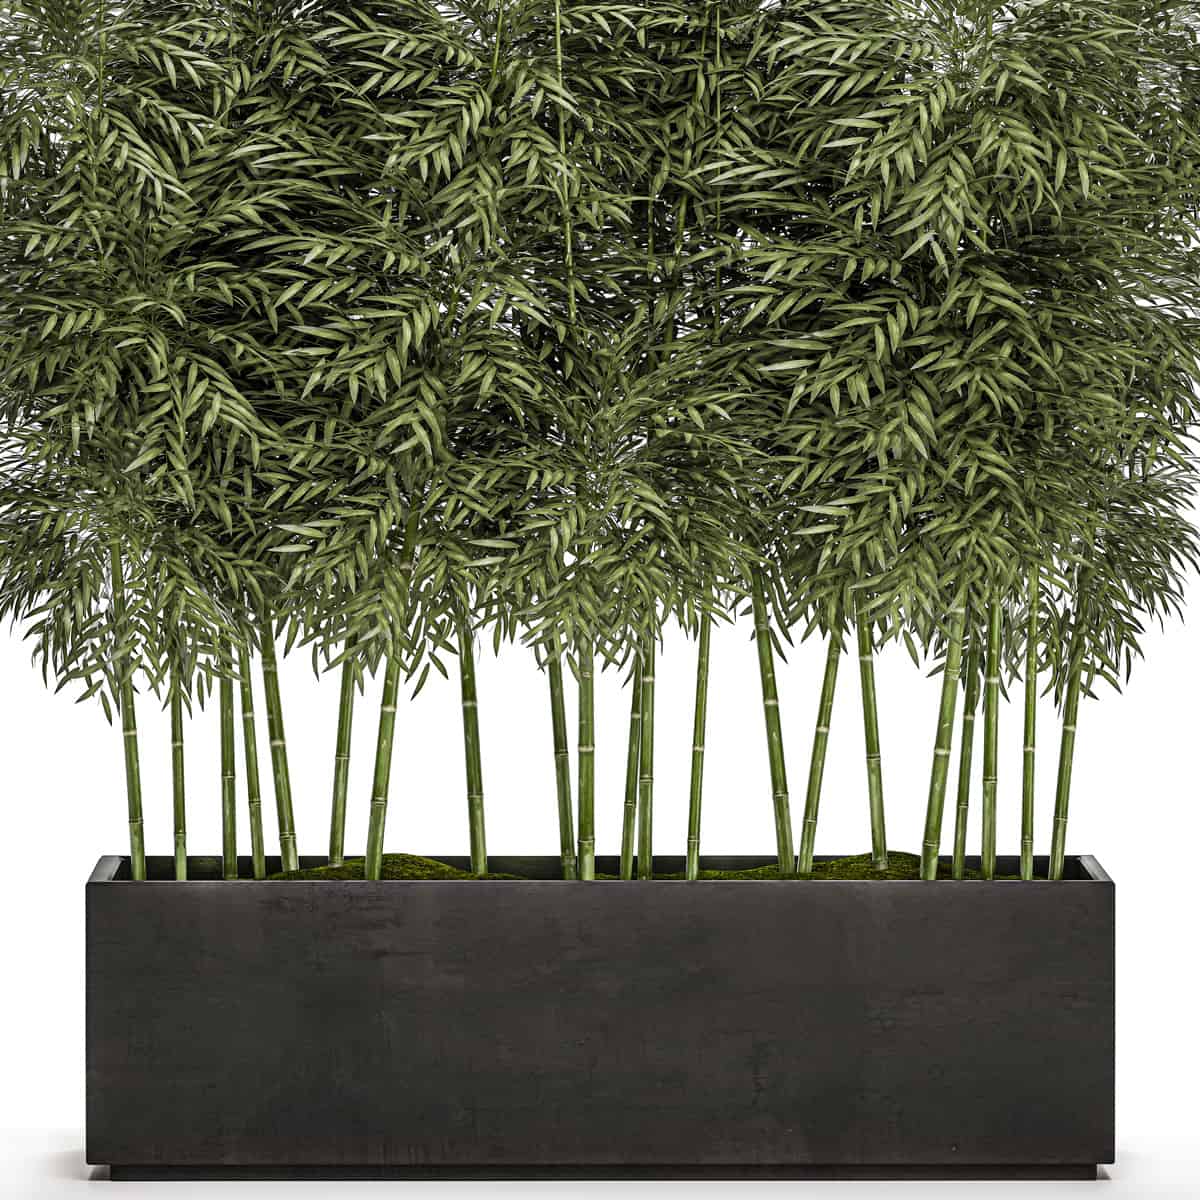 3D illustration of Bamboo bushes in a black pot isolated on white background